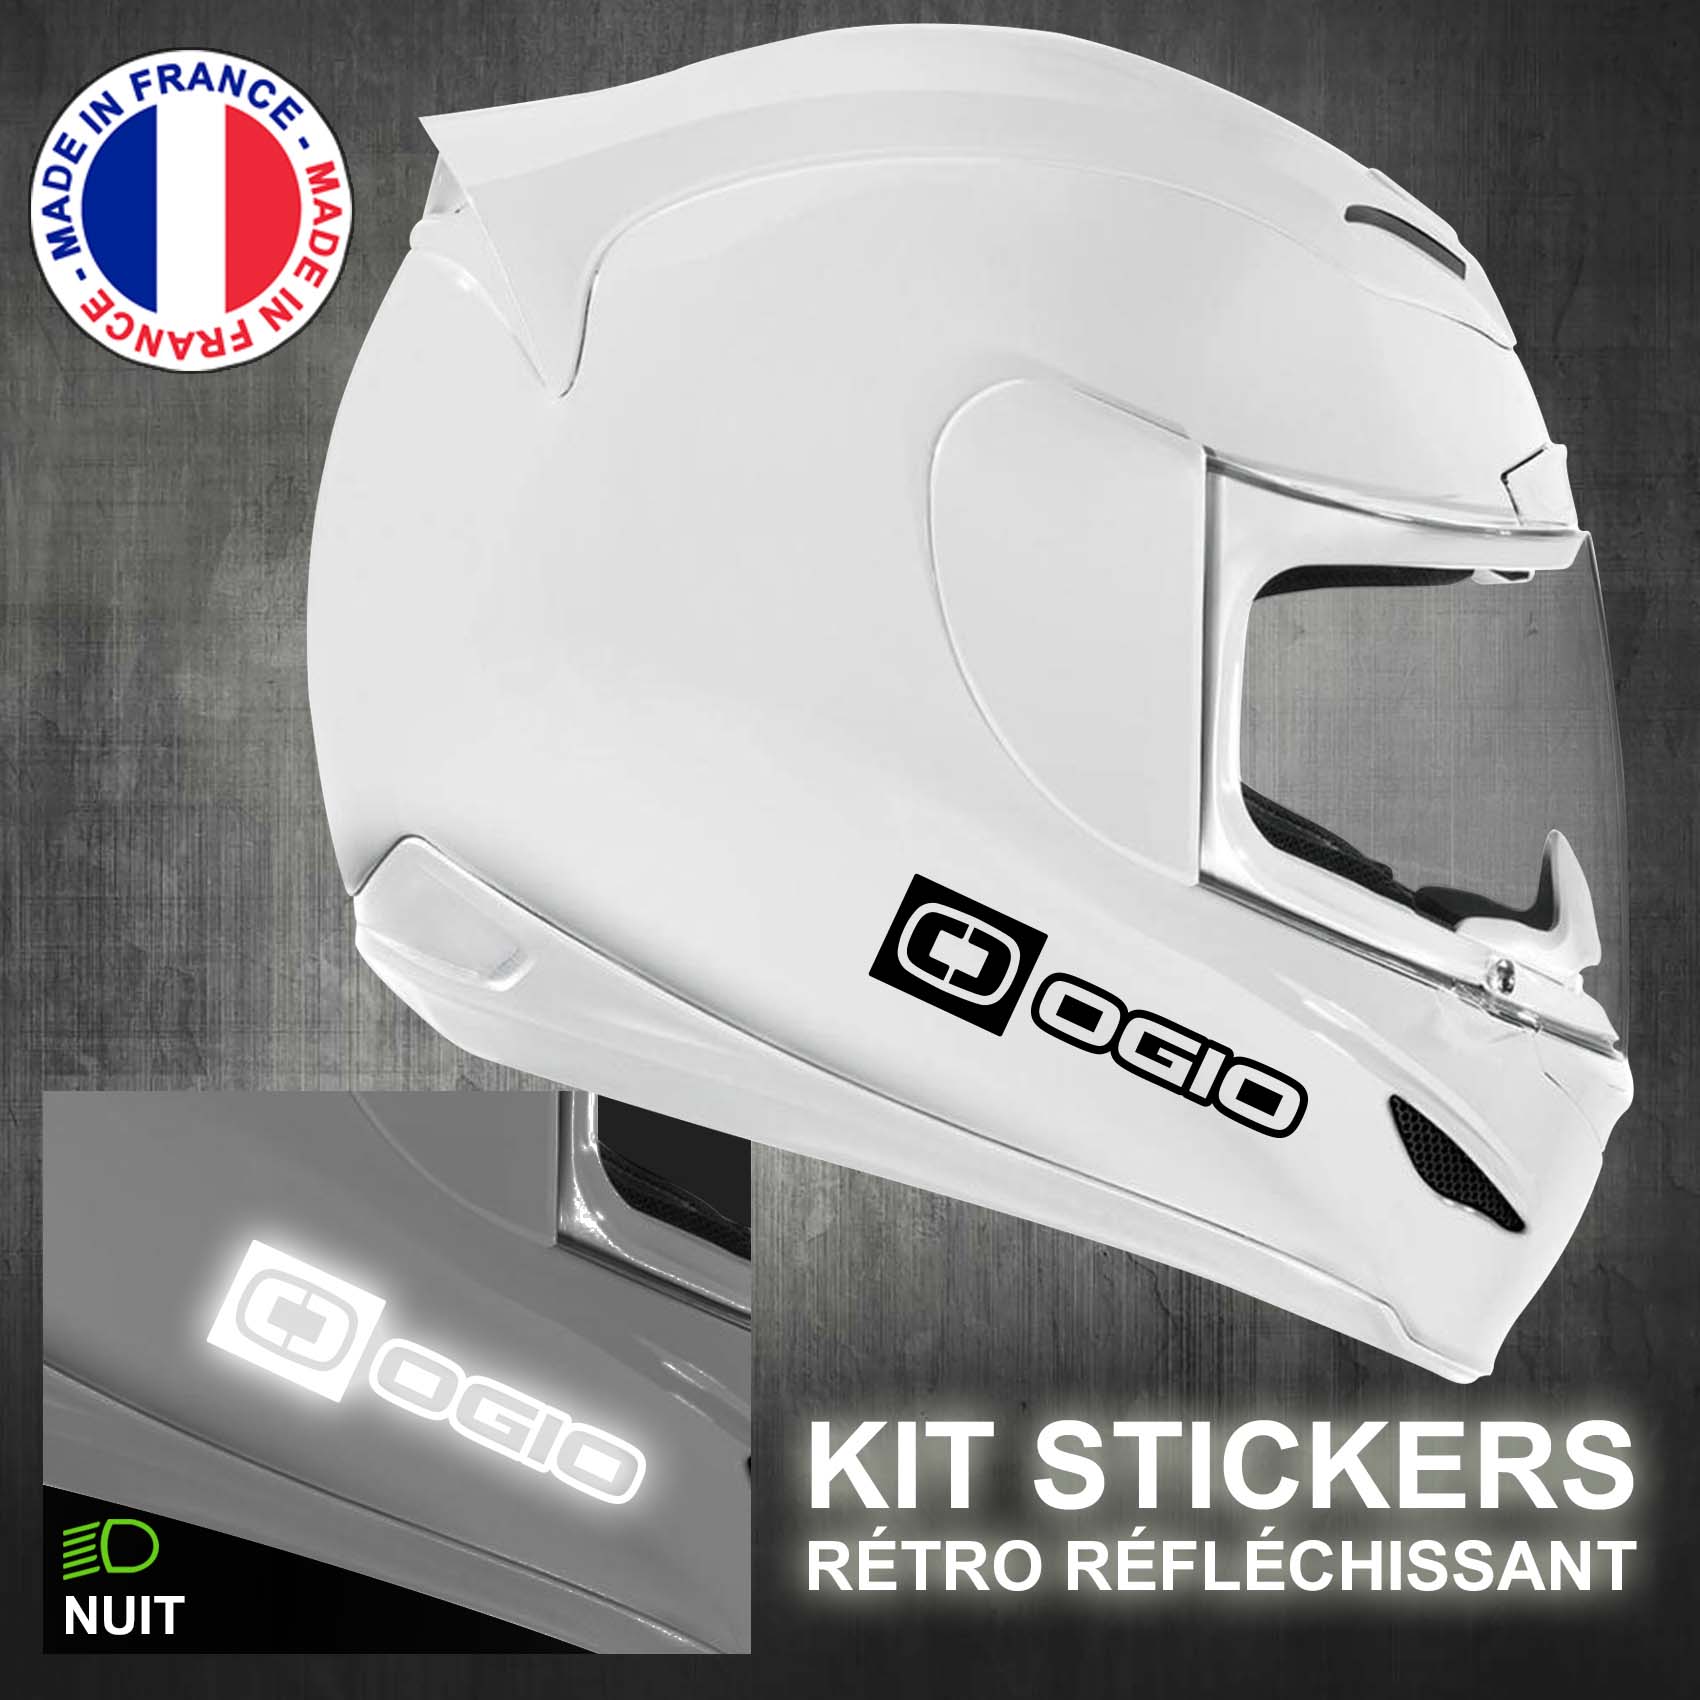 stickers-casque-moto-ogio-ref2-retro-reflechissant-autocollant-moto-velo-tuning-racing-route-sticker-casques-adhesif-scooter-nuit-securite-decals-personnalise-personnalisable-min